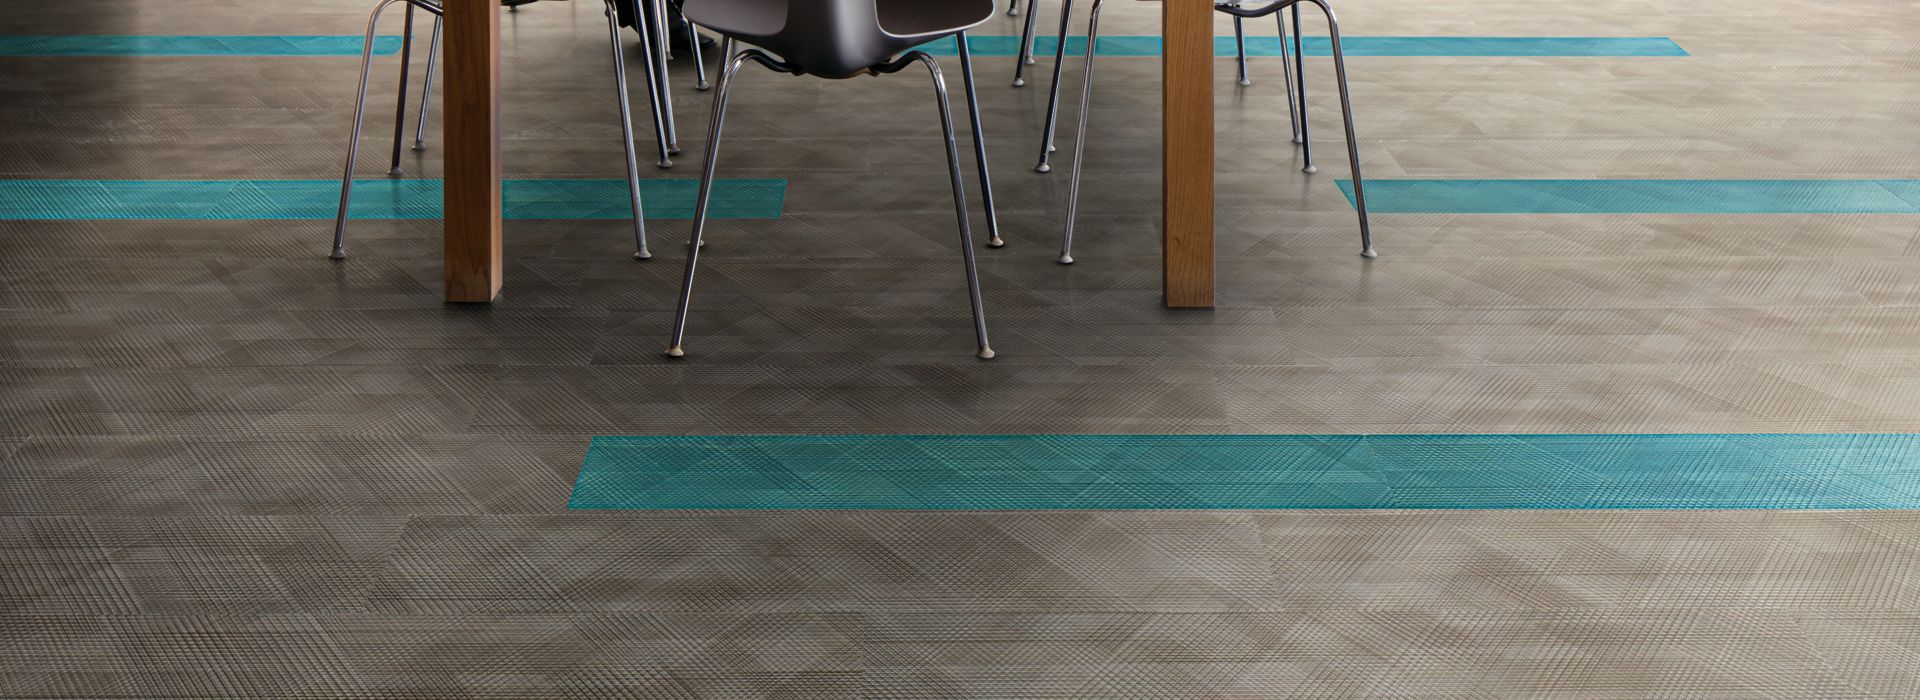 Interface Drawn Lines LVT in cafeteria setting with long table and chairs  image number 1